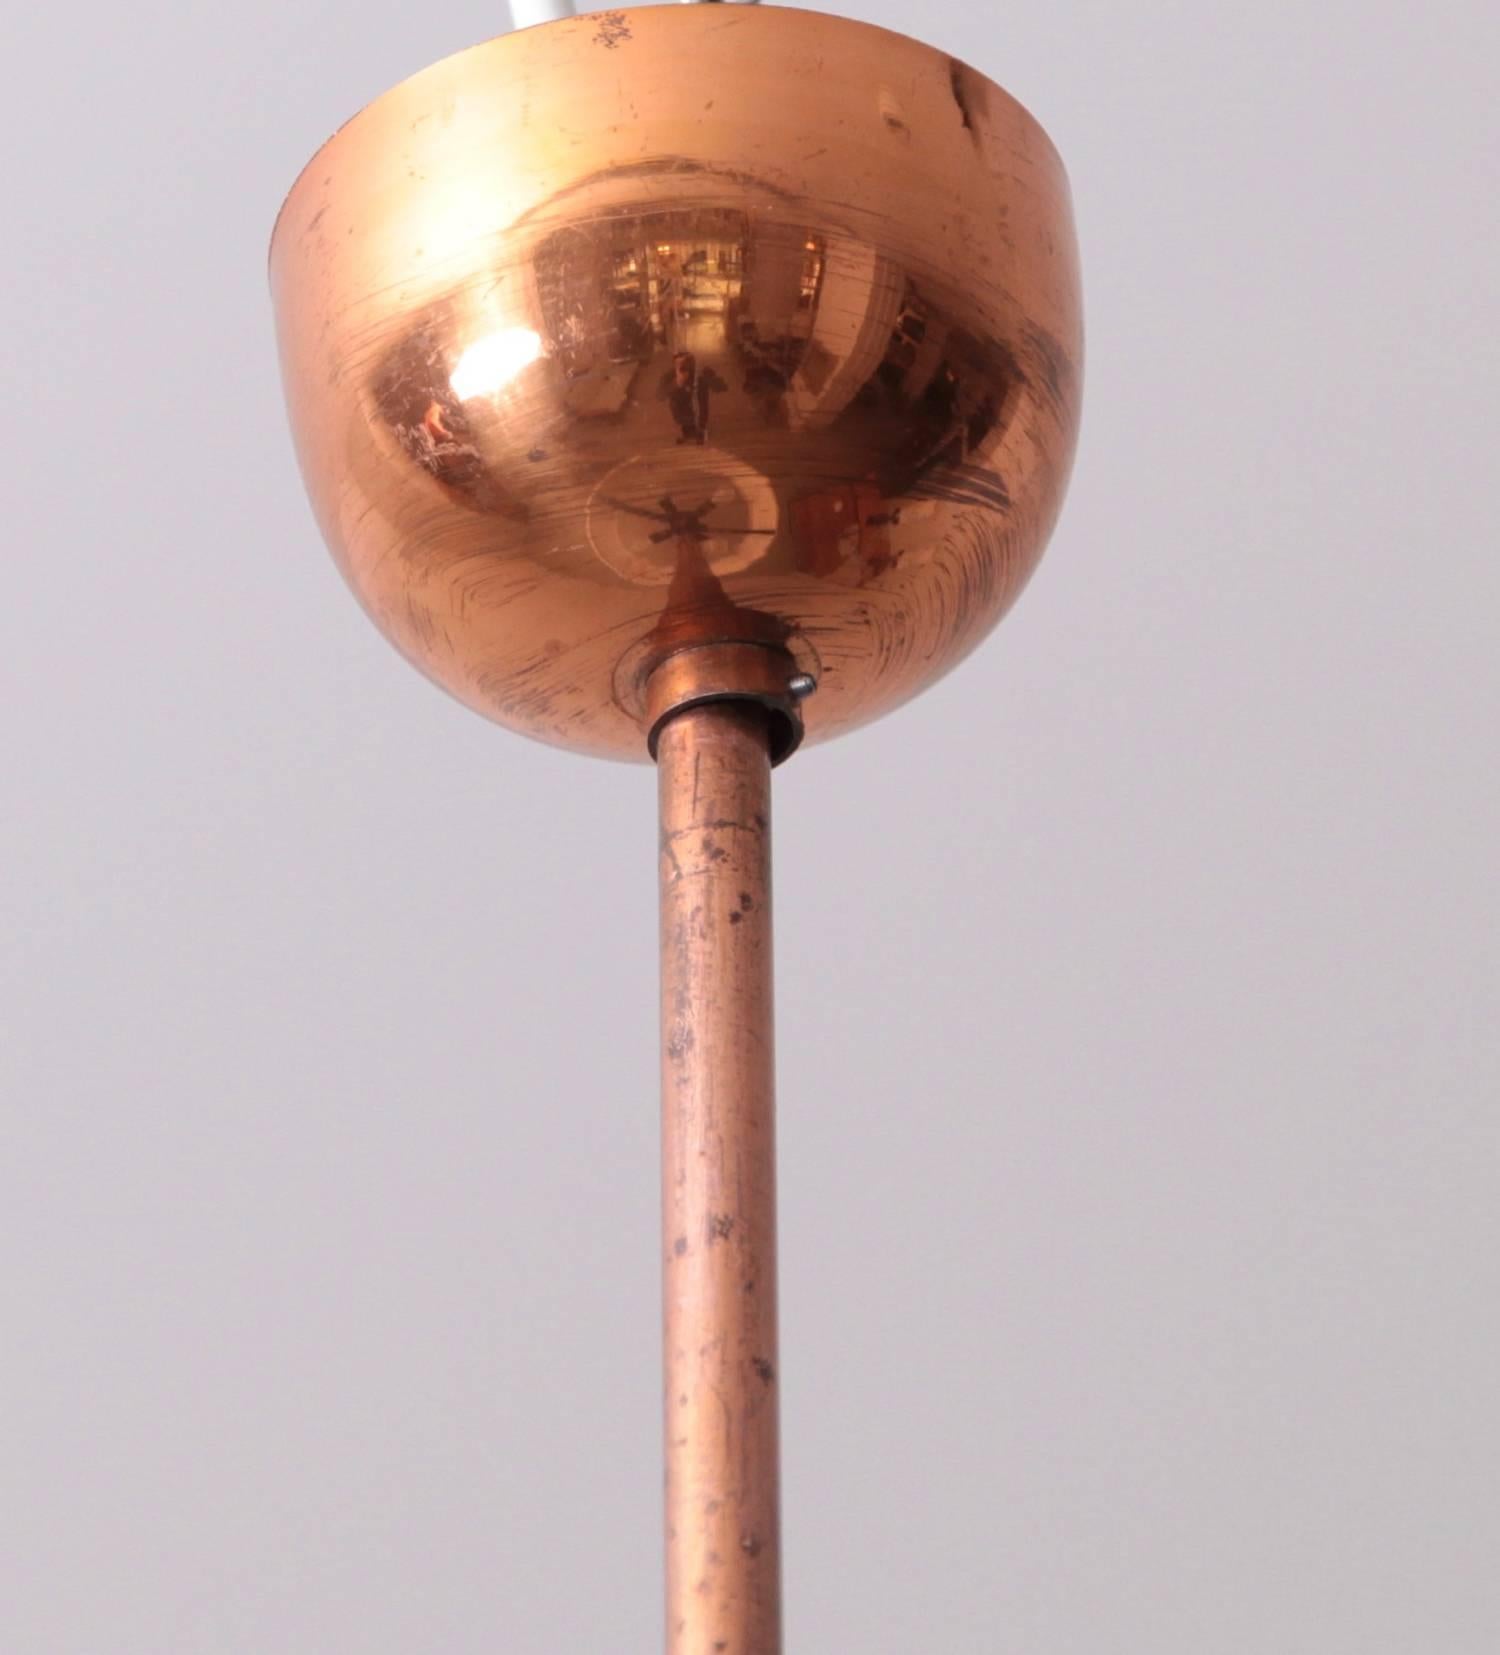 Art Deco 1930s Copper and Glass Pendant Lamp by Josef Hurka for Napako, 1 of 2 For Sale